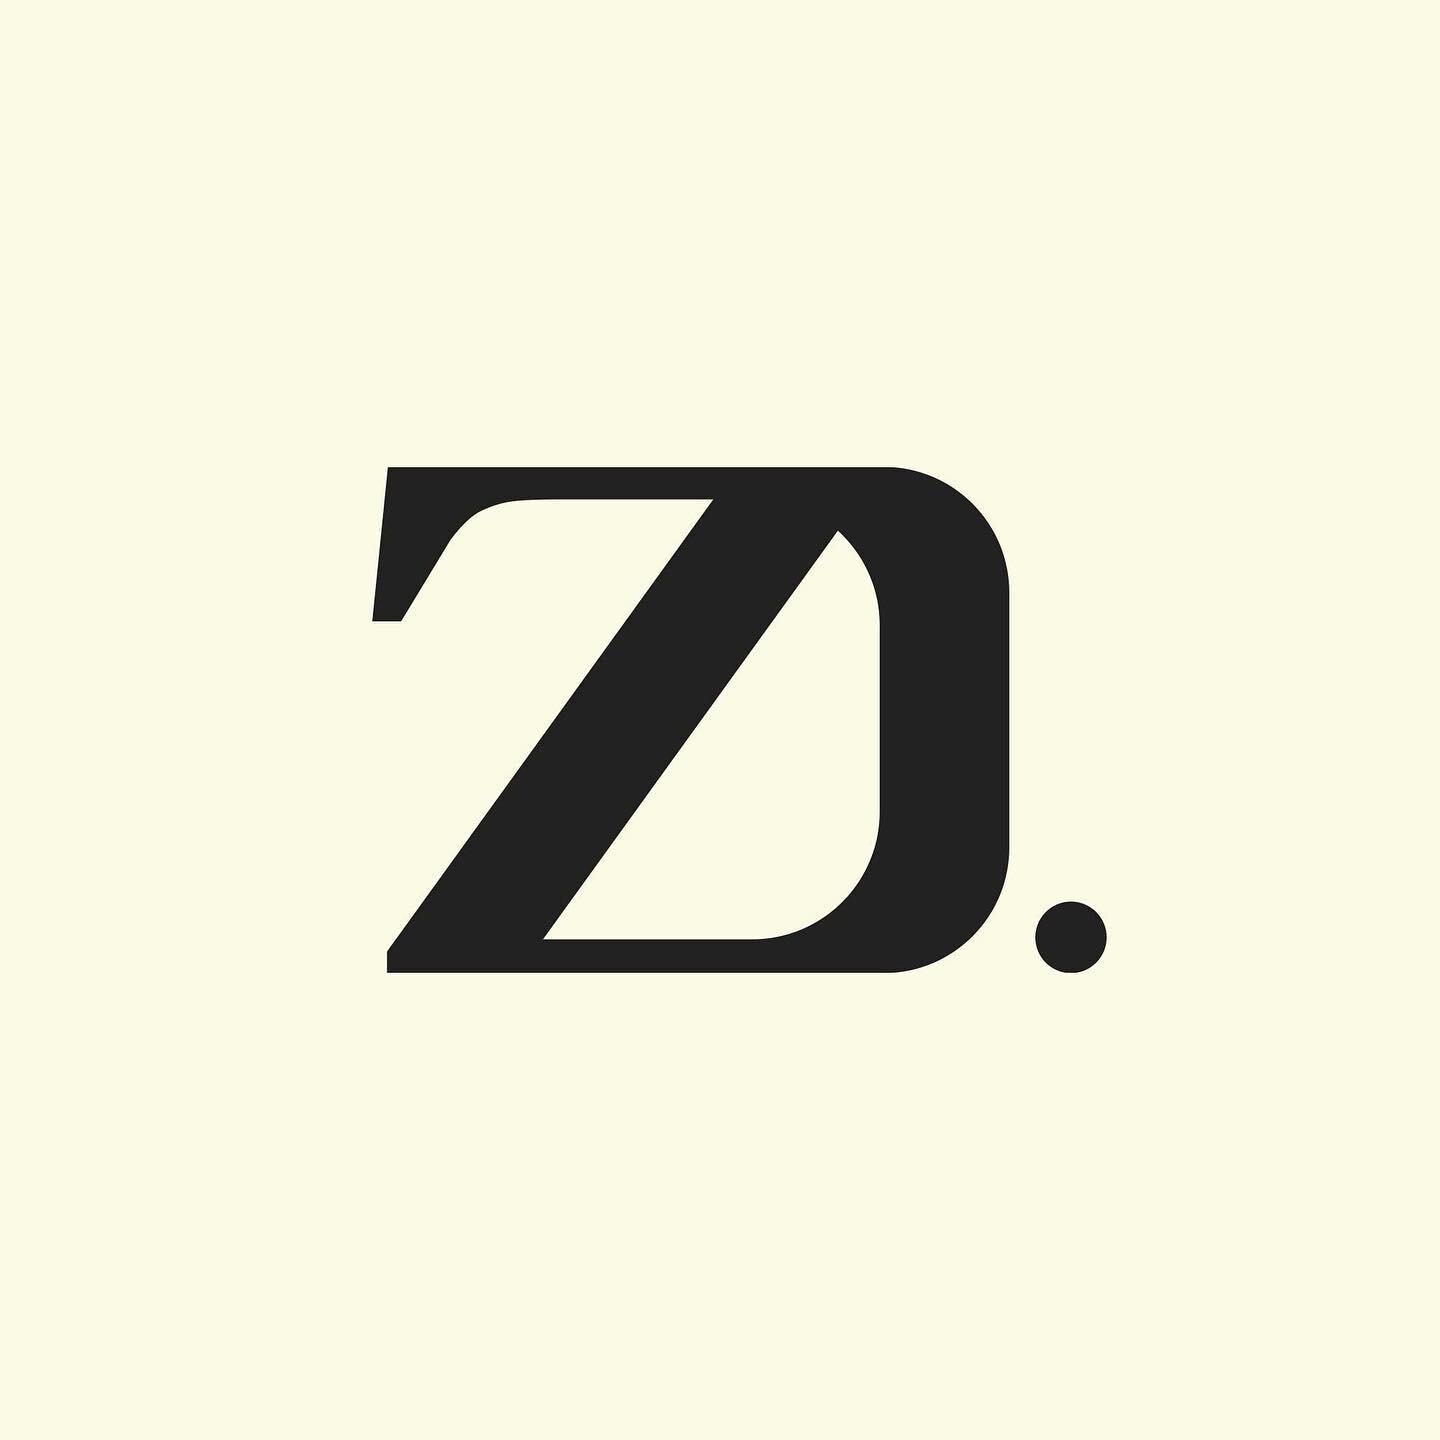 This was one of the fun lil marks I created for a brand development project, although it didn&rsquo;t make the final cut. It&rsquo;s using the letters D and Z to form a unique insignia. The goal was to create a clean and sophisticated design that tai